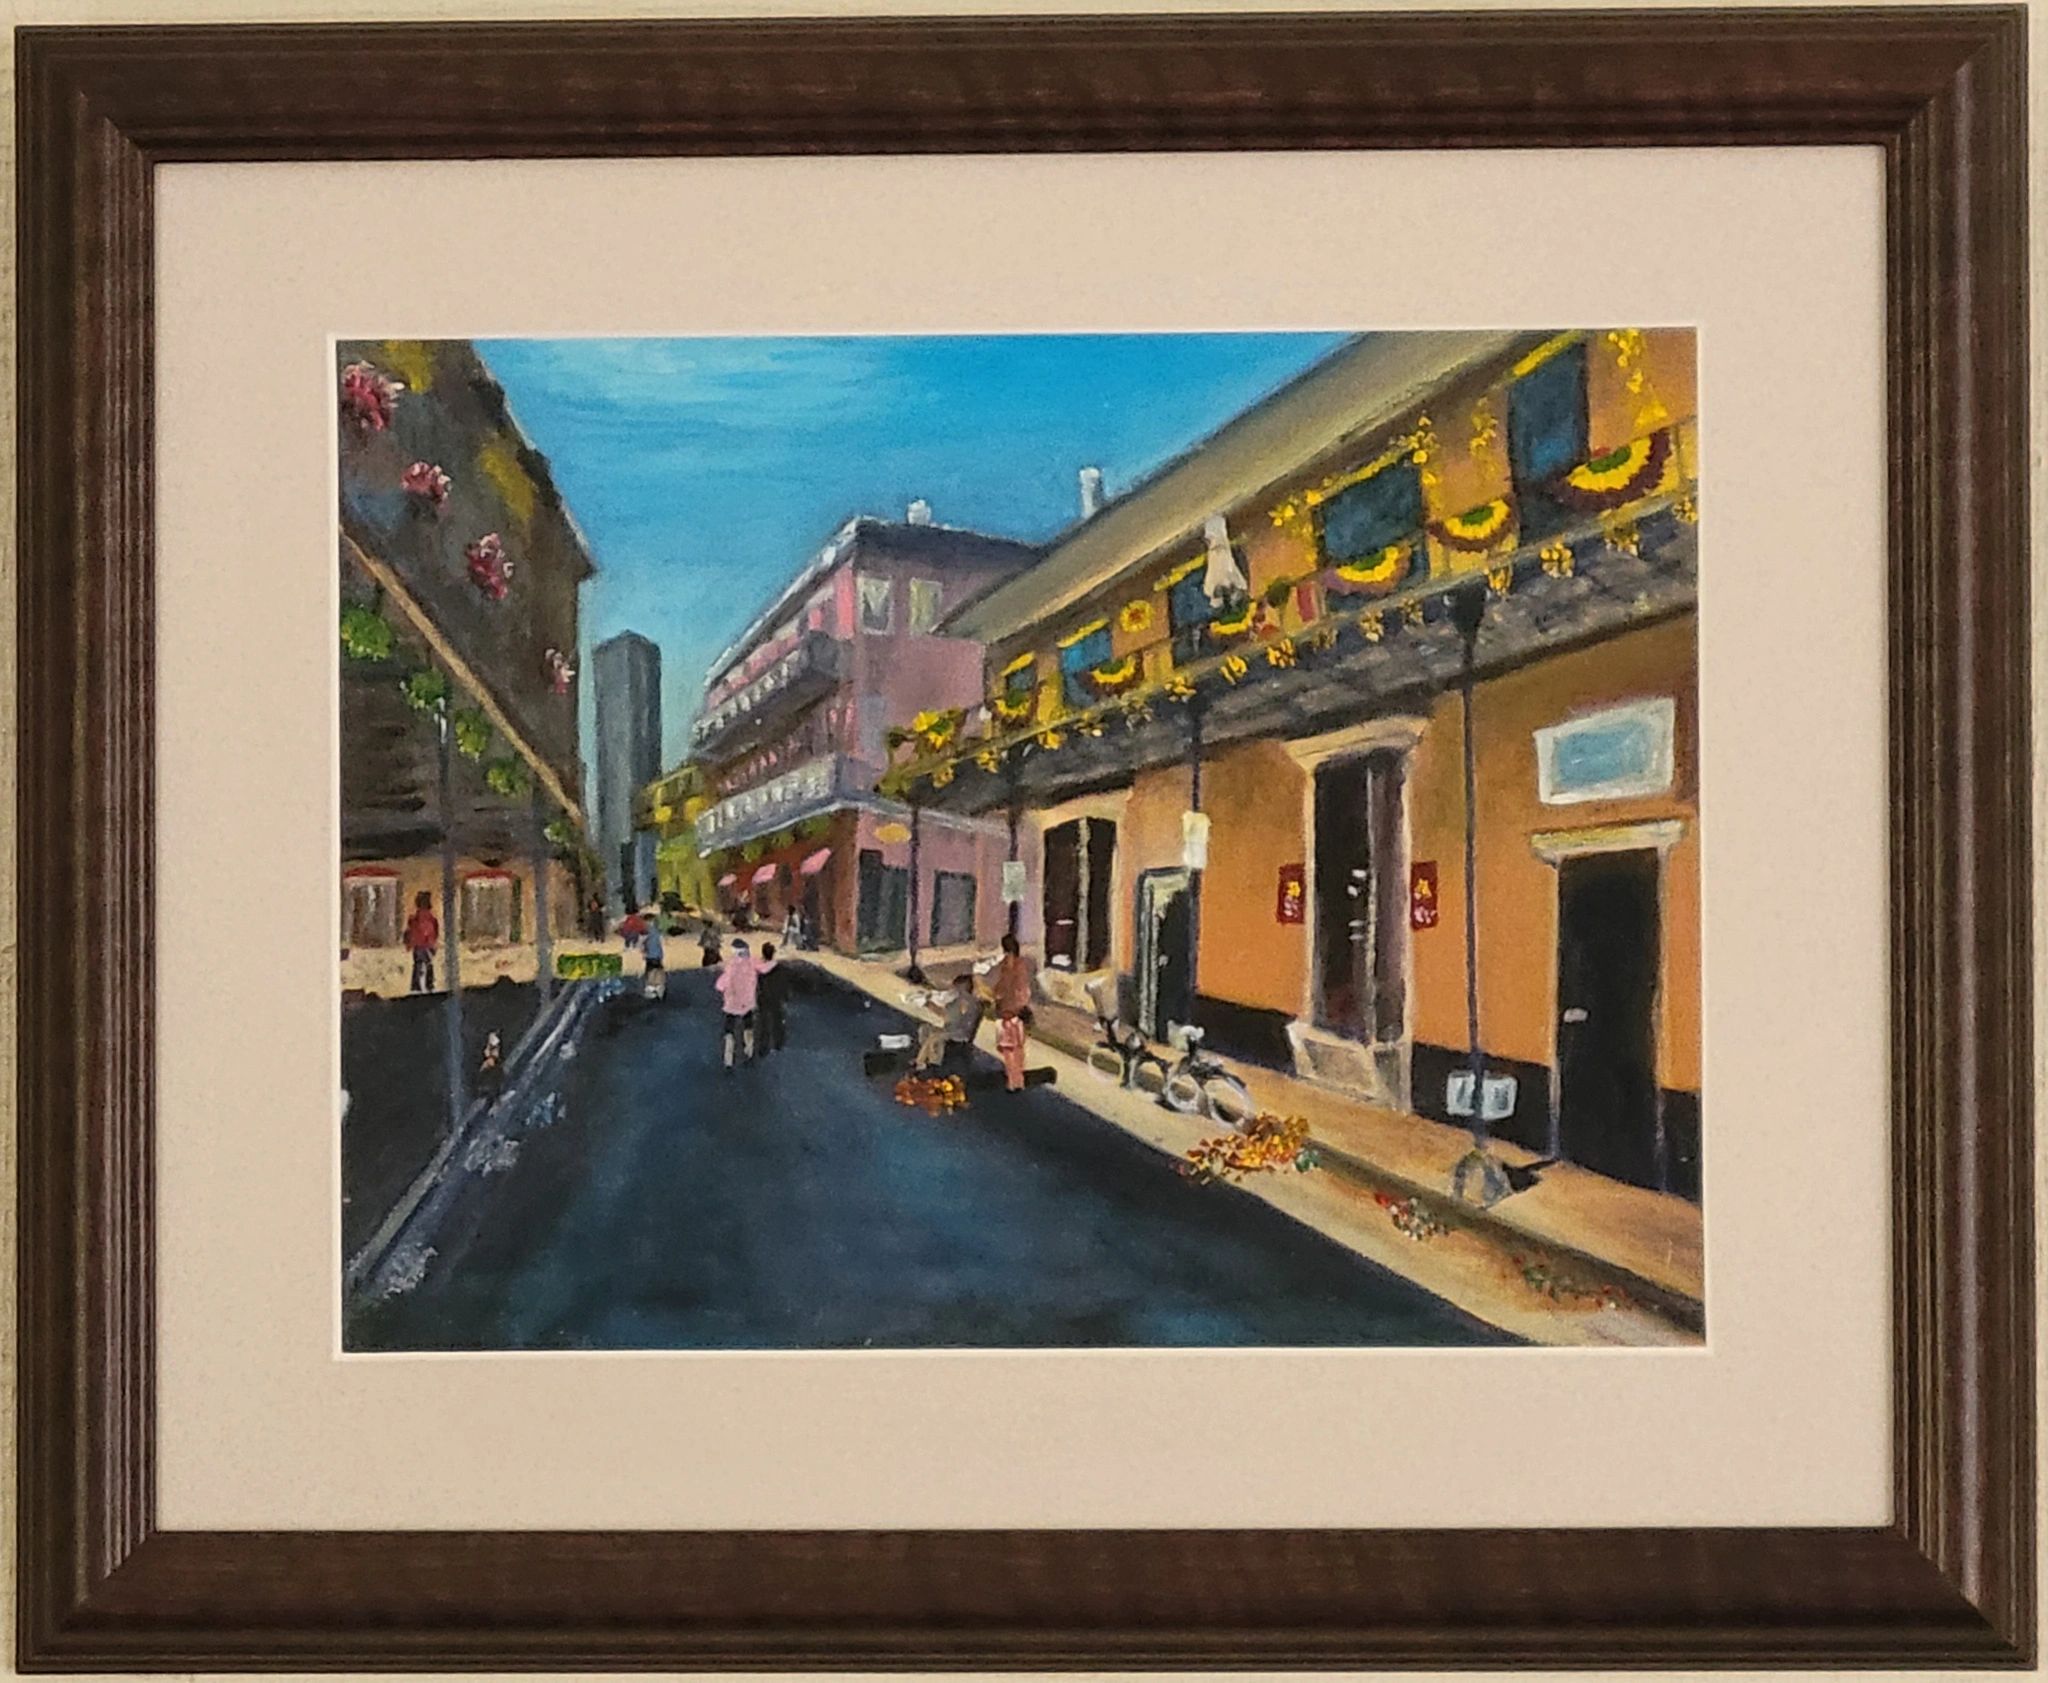 New Orleans after the Mardi Gras, Oil on Canvas; 13 H x 17 W inches; Price = $550